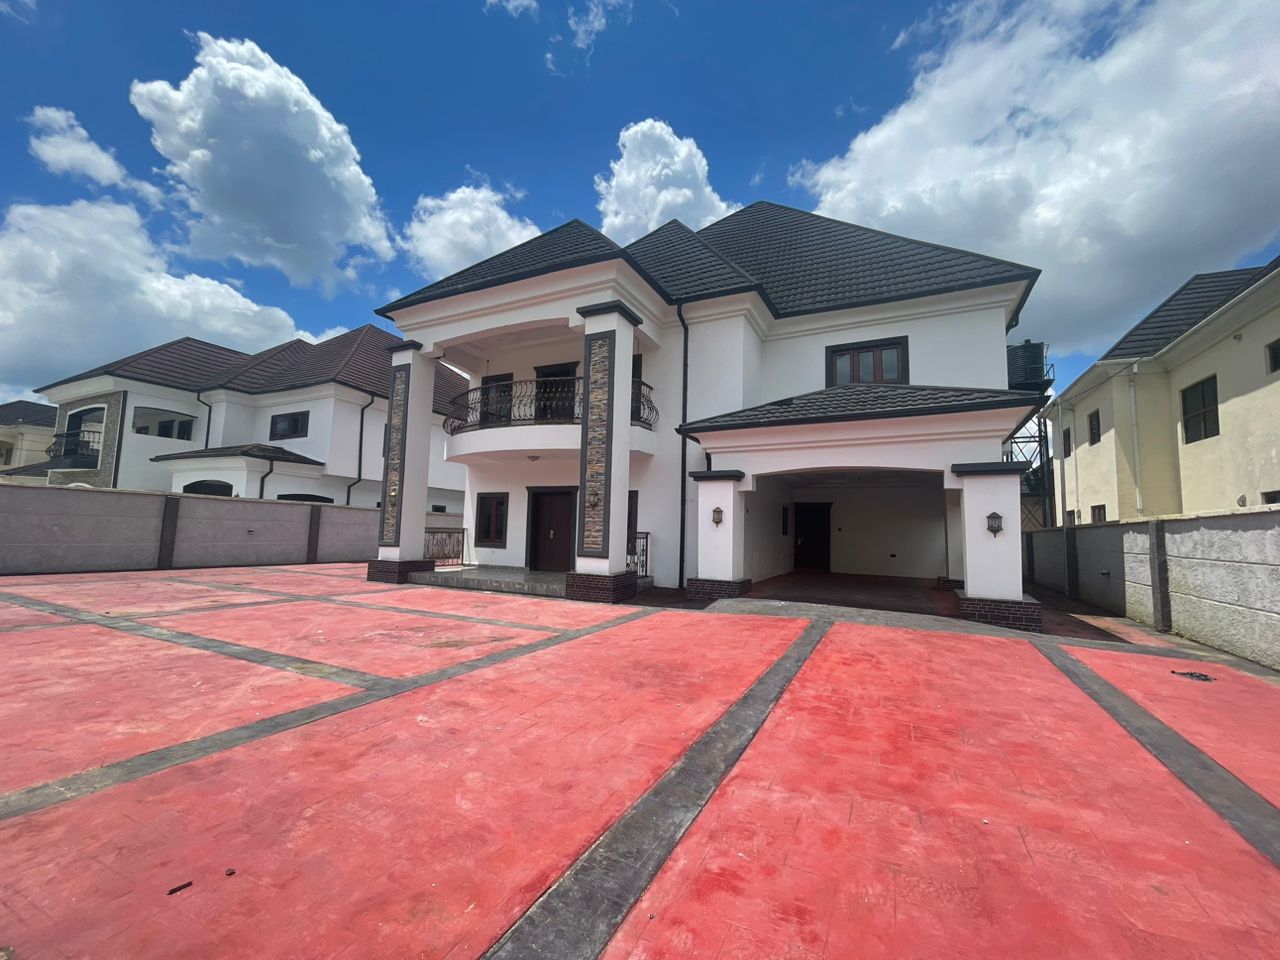 5 Bedroom Fully Detached Duplex with Bq For Sale in Owerri Imo State by Mc Capital Properties